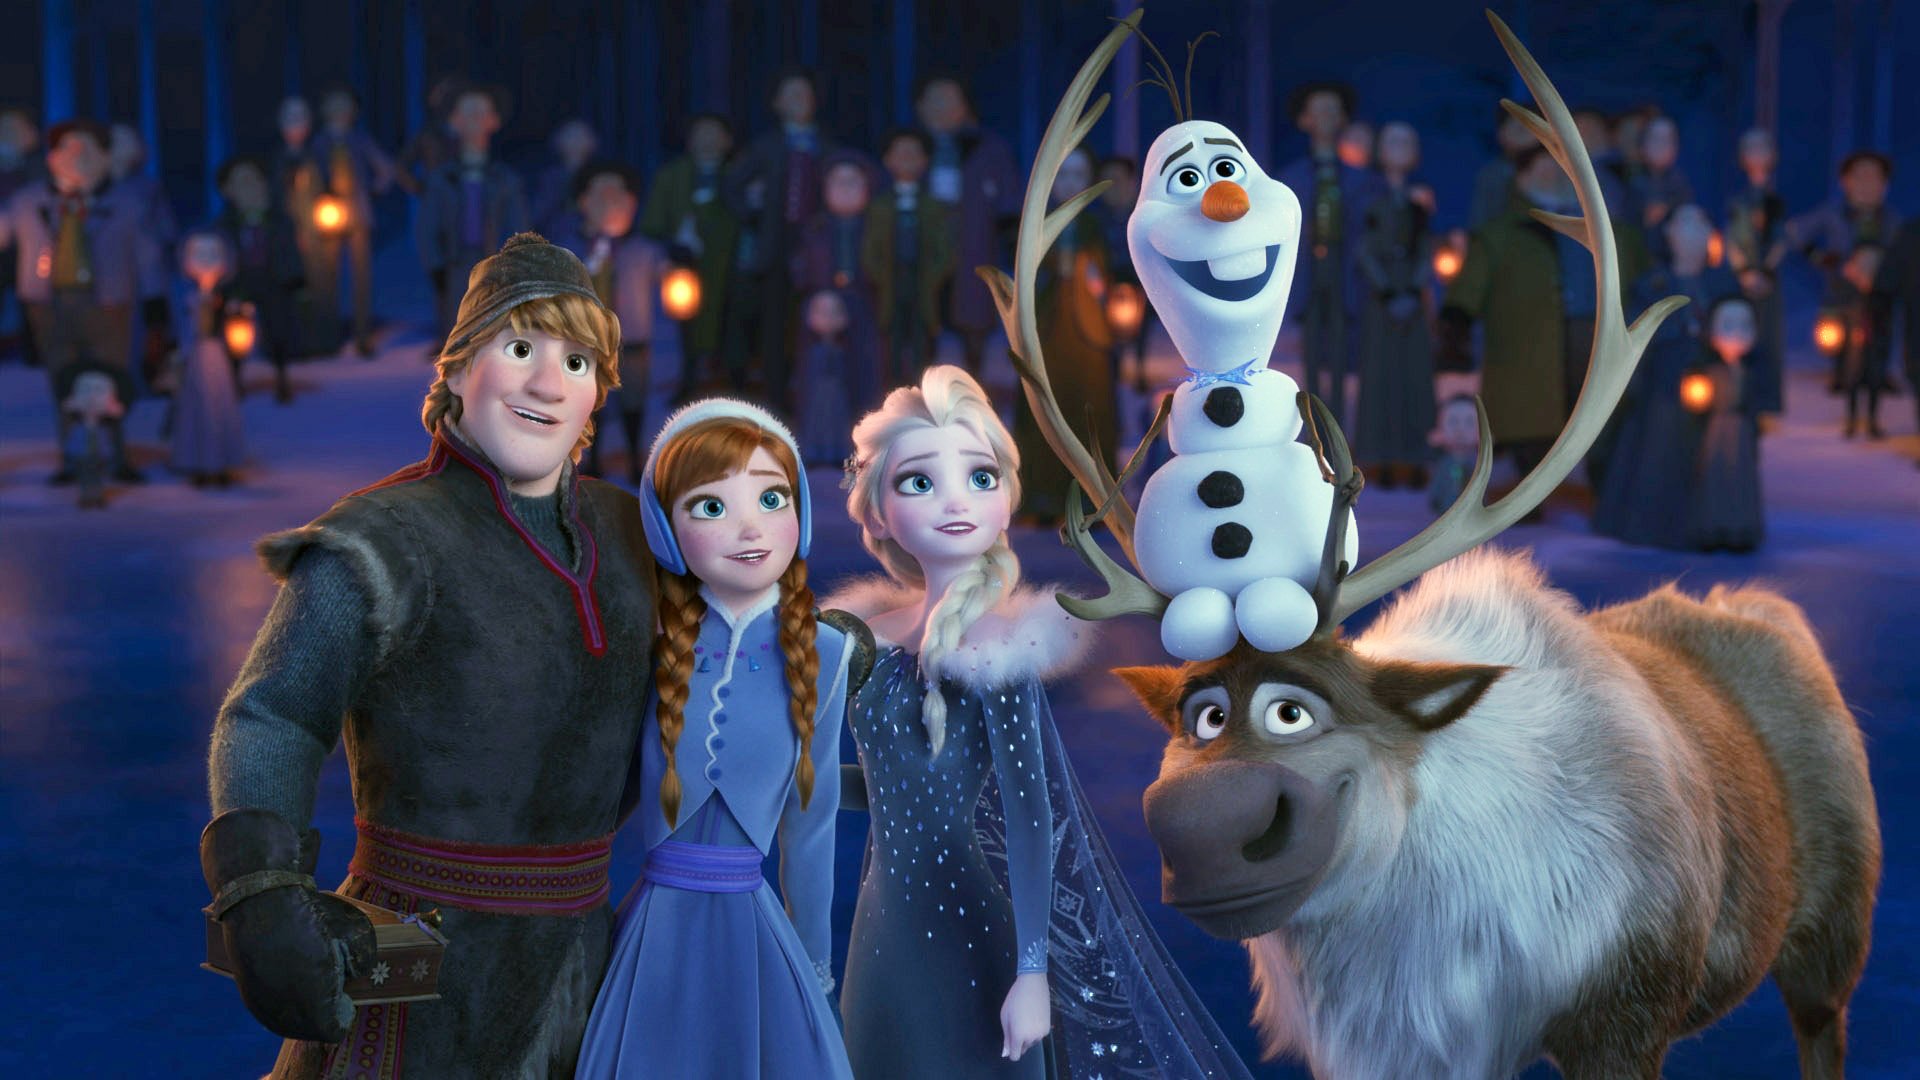 Does the Frozen Short Still Play Before Coco? | POPSUGAR Entertainment